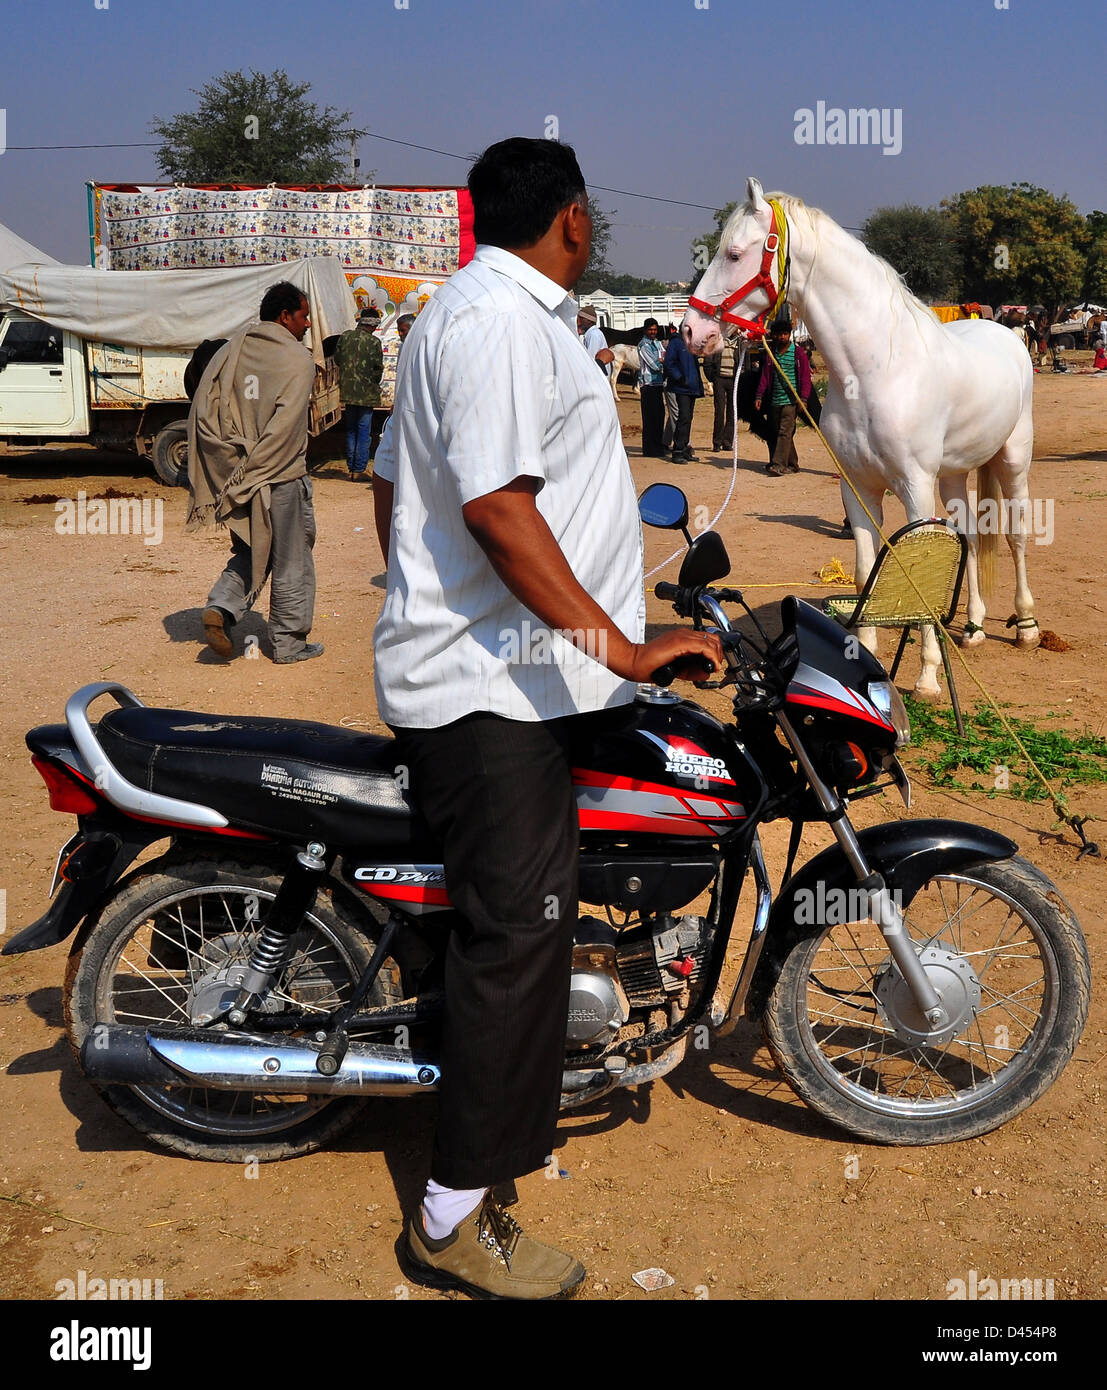 A motorcyclist admires a horse at the cattle fair in western Indian town of Nagaur, in Rajasthan state Stock Photo